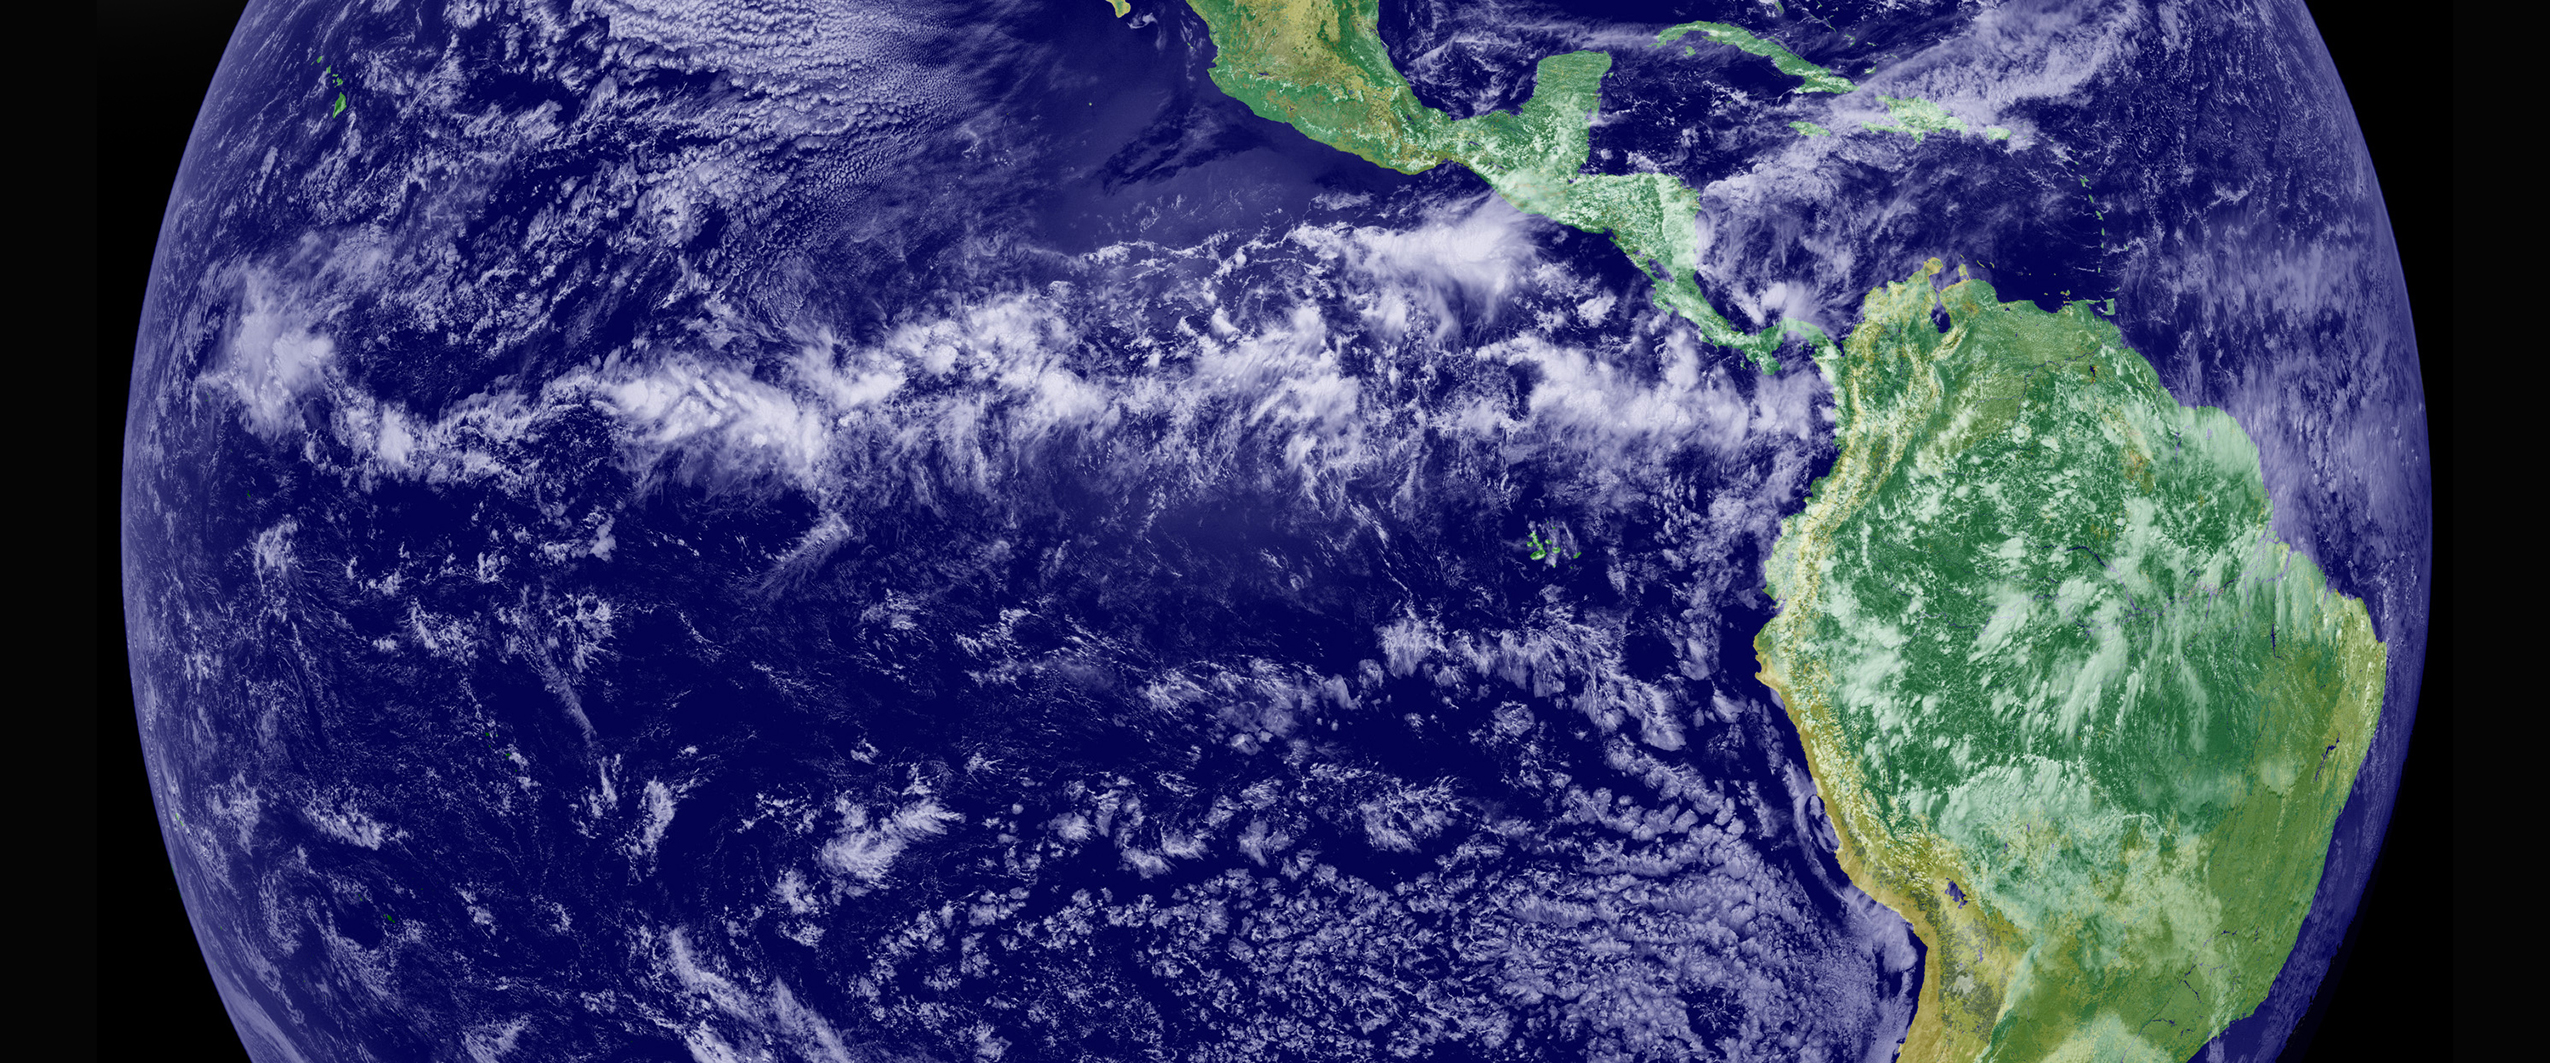 A band of clouds in the East Pacific Intertropical Convergence Zone as imaged by the geostationary GOES 11 satellite. Image credit: NASA Visible Earth, GOES Project Science Office. > High res figure